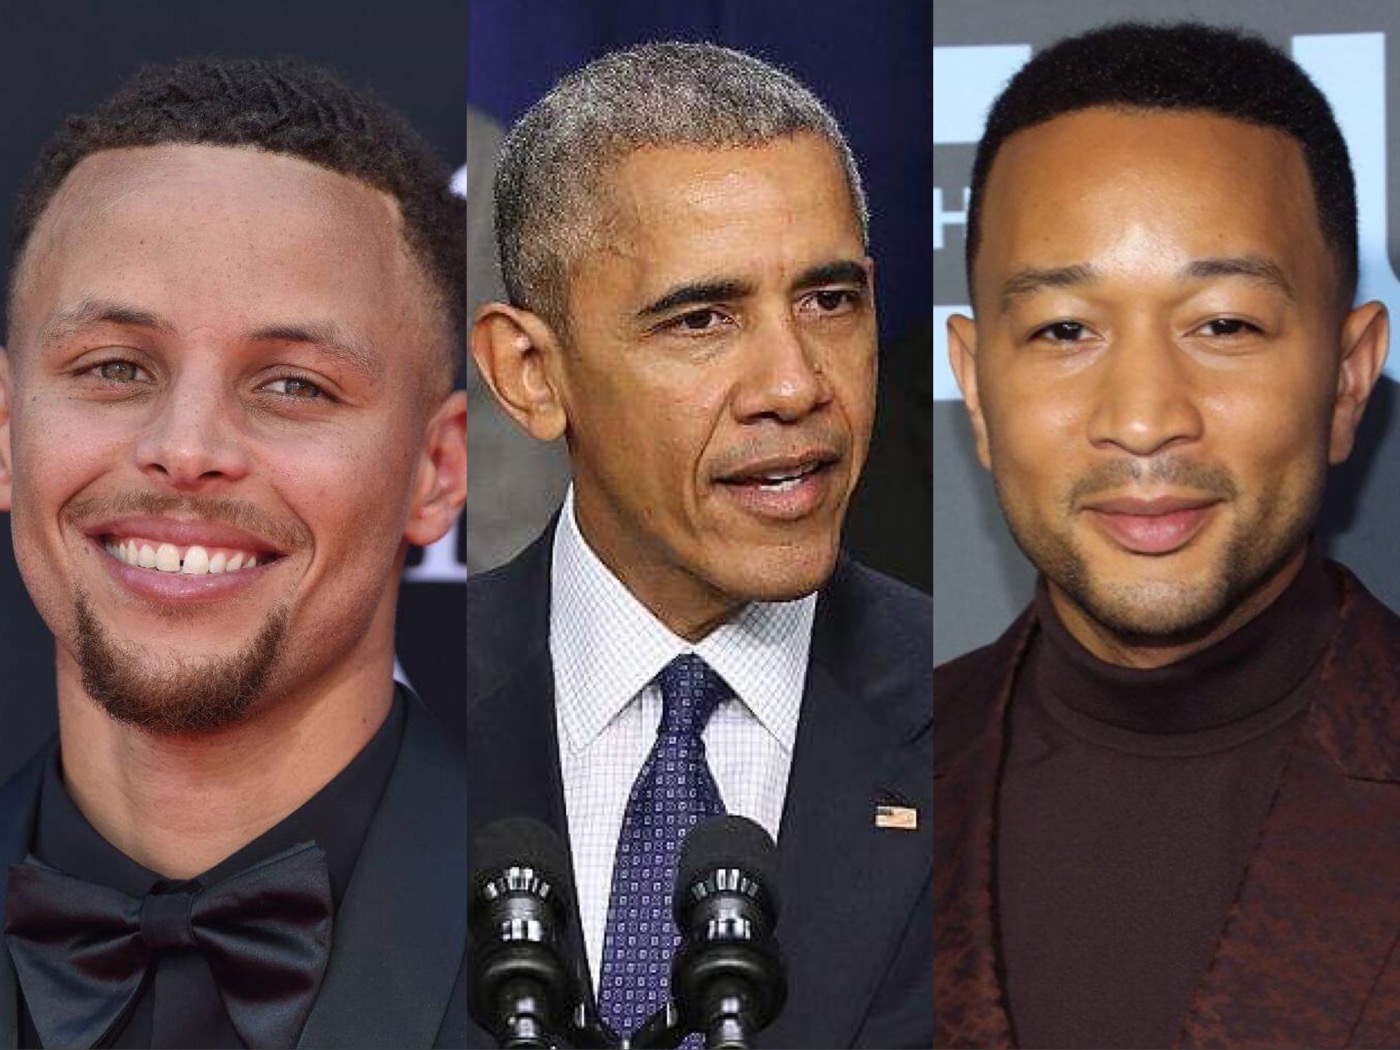 John Legend, Steph Curry To Join Barack Obama For The First My Brother's Keeper National Summit In Oakland